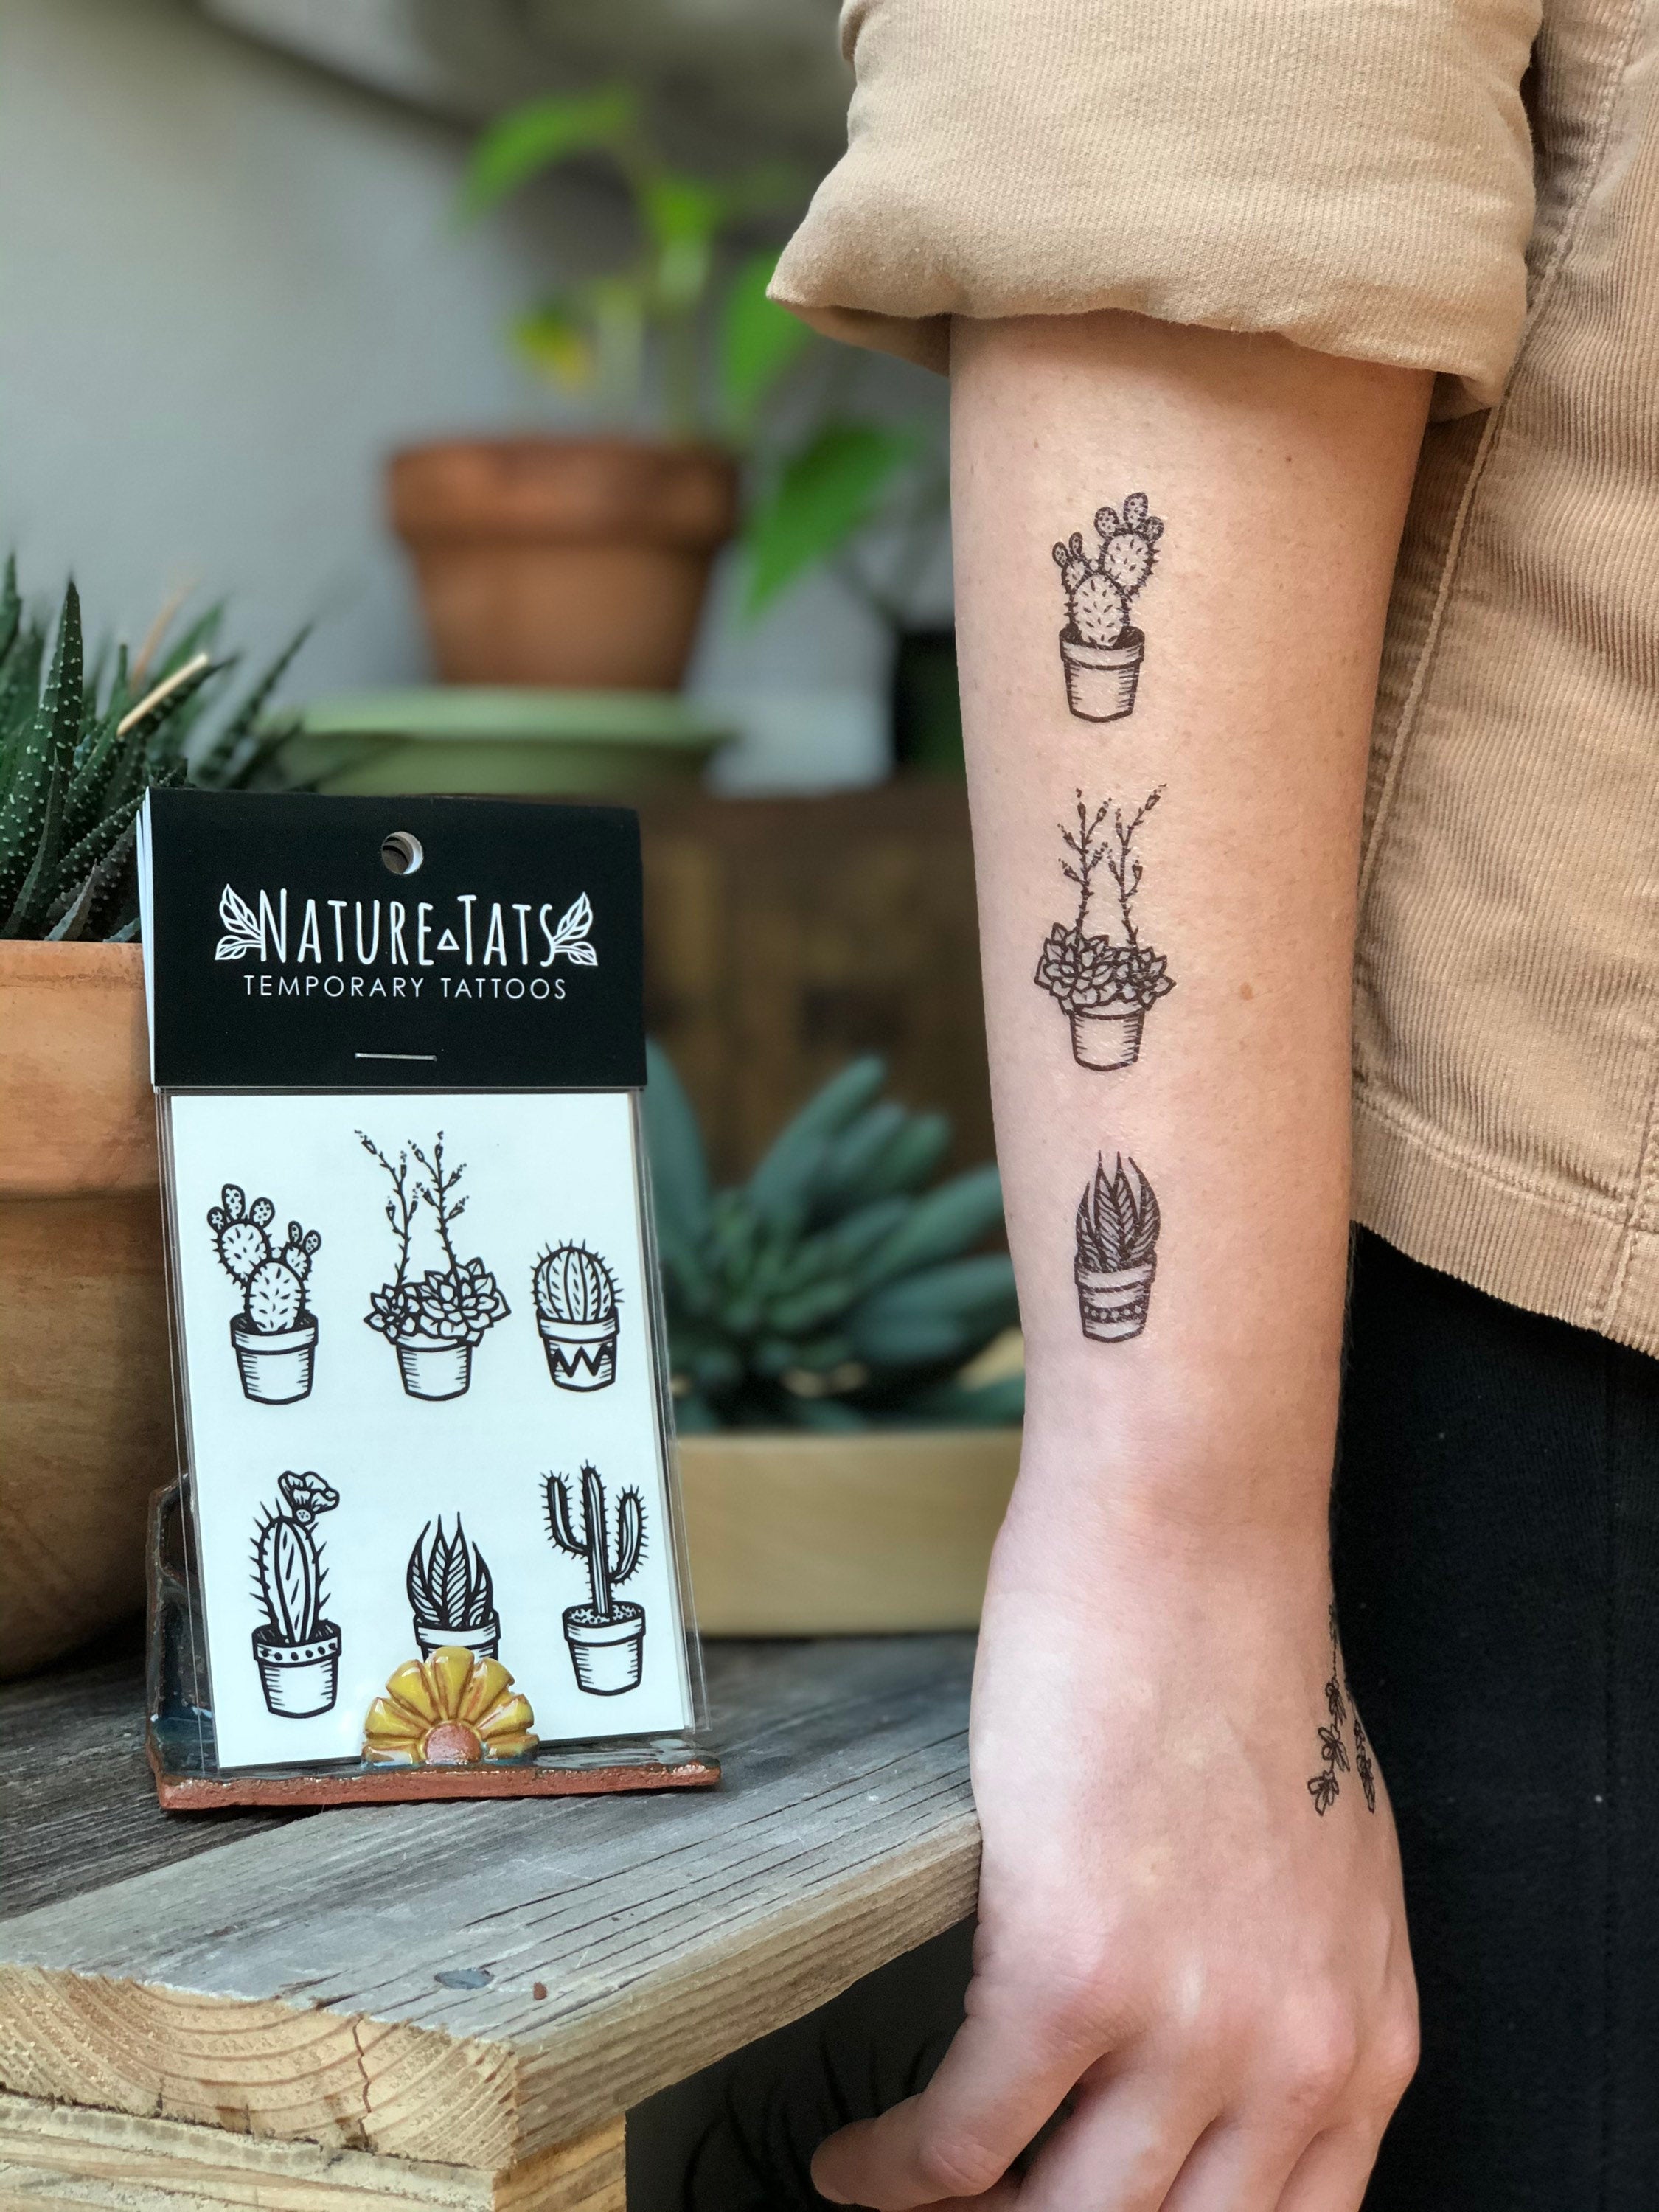 Cactus tattoos symbolize adaptability change and the desire to constantly  try new things and throw yourself into new  Instagram